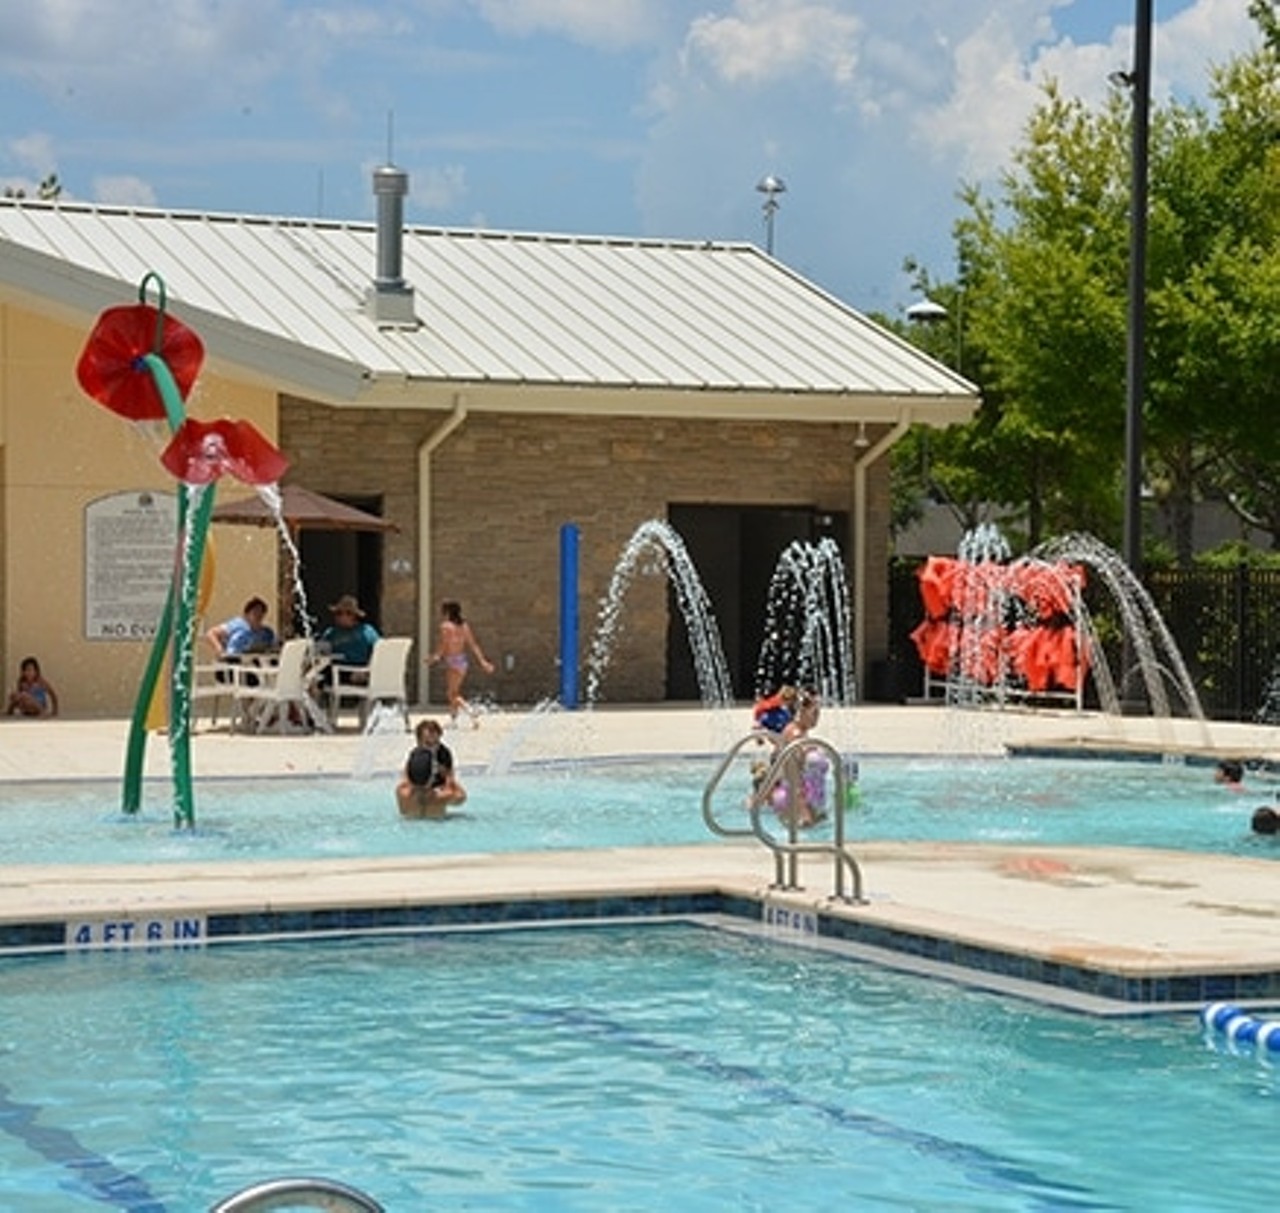 City of Winter Park 
721 W. New England Ave., Winter Park, FL 32789, (407)-643-1650
This community center pool offers public swim Monday-Friday from 12 to 5 p.m., and on Saturday and Sunday 12 to 6 p.m. They also offer lap swimming. The fees are $2 for residents and $5 for non-residents.
Photo via City of Winter Park